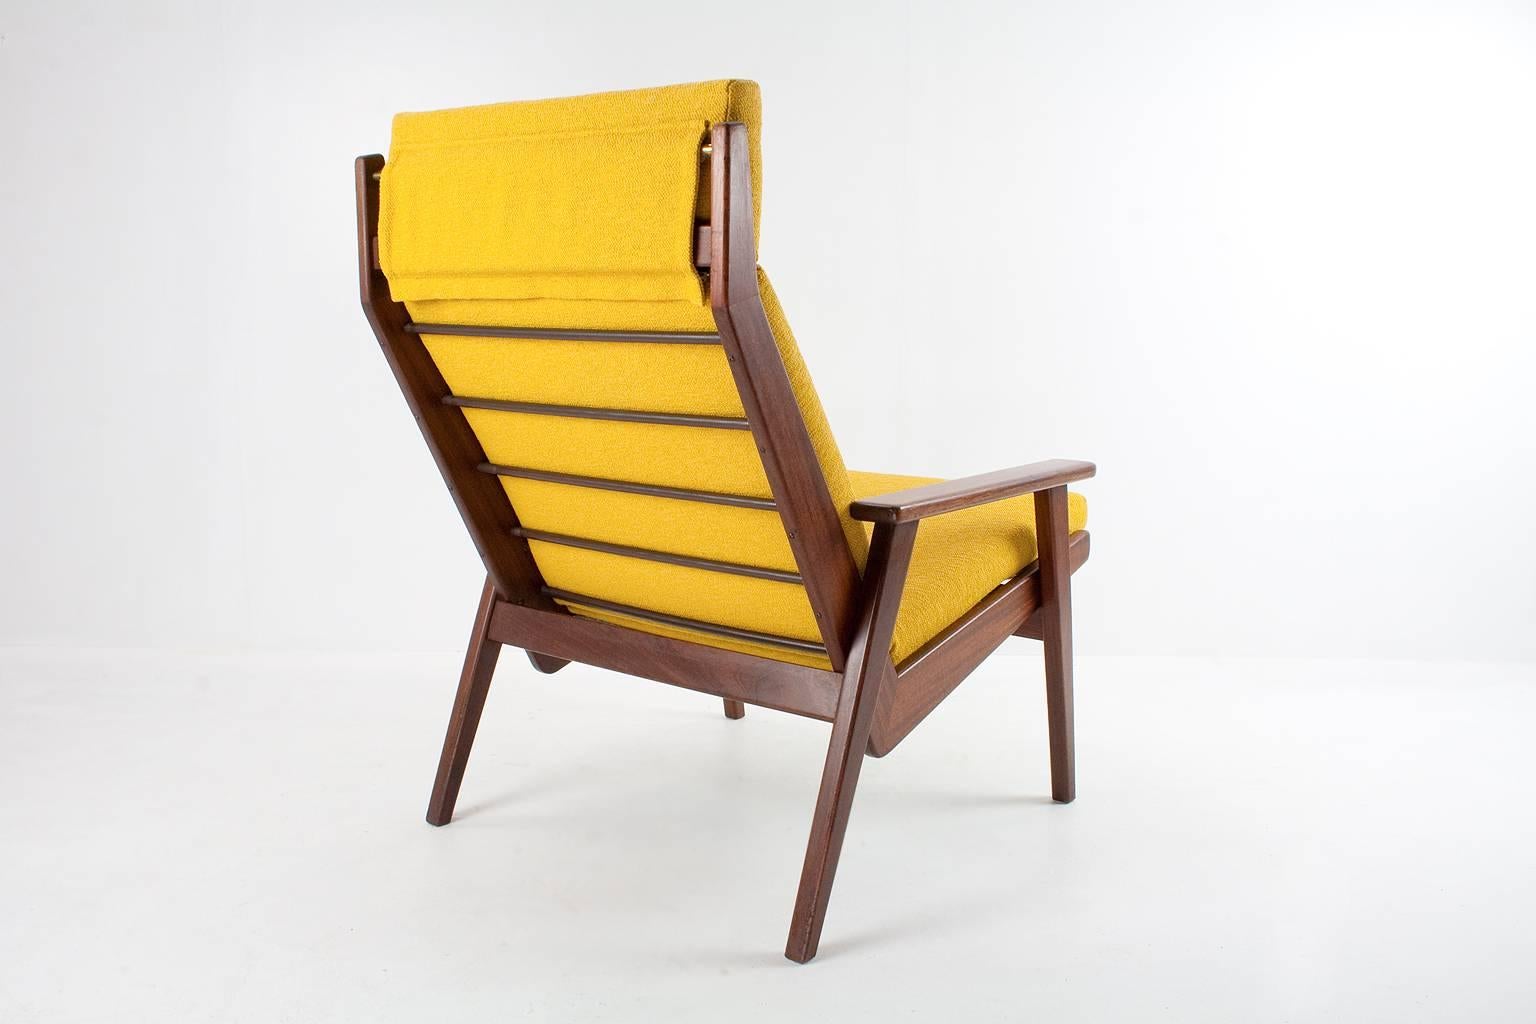 Original Rob Parry lotus lounge chair for Dutch furniture company Gelderland (collection 1950s-1960s) in wood with new yellow upholstery (De Ploeg-Korinthe). The fabric, fillings and webbing is completely renewed, the frame is restored and in